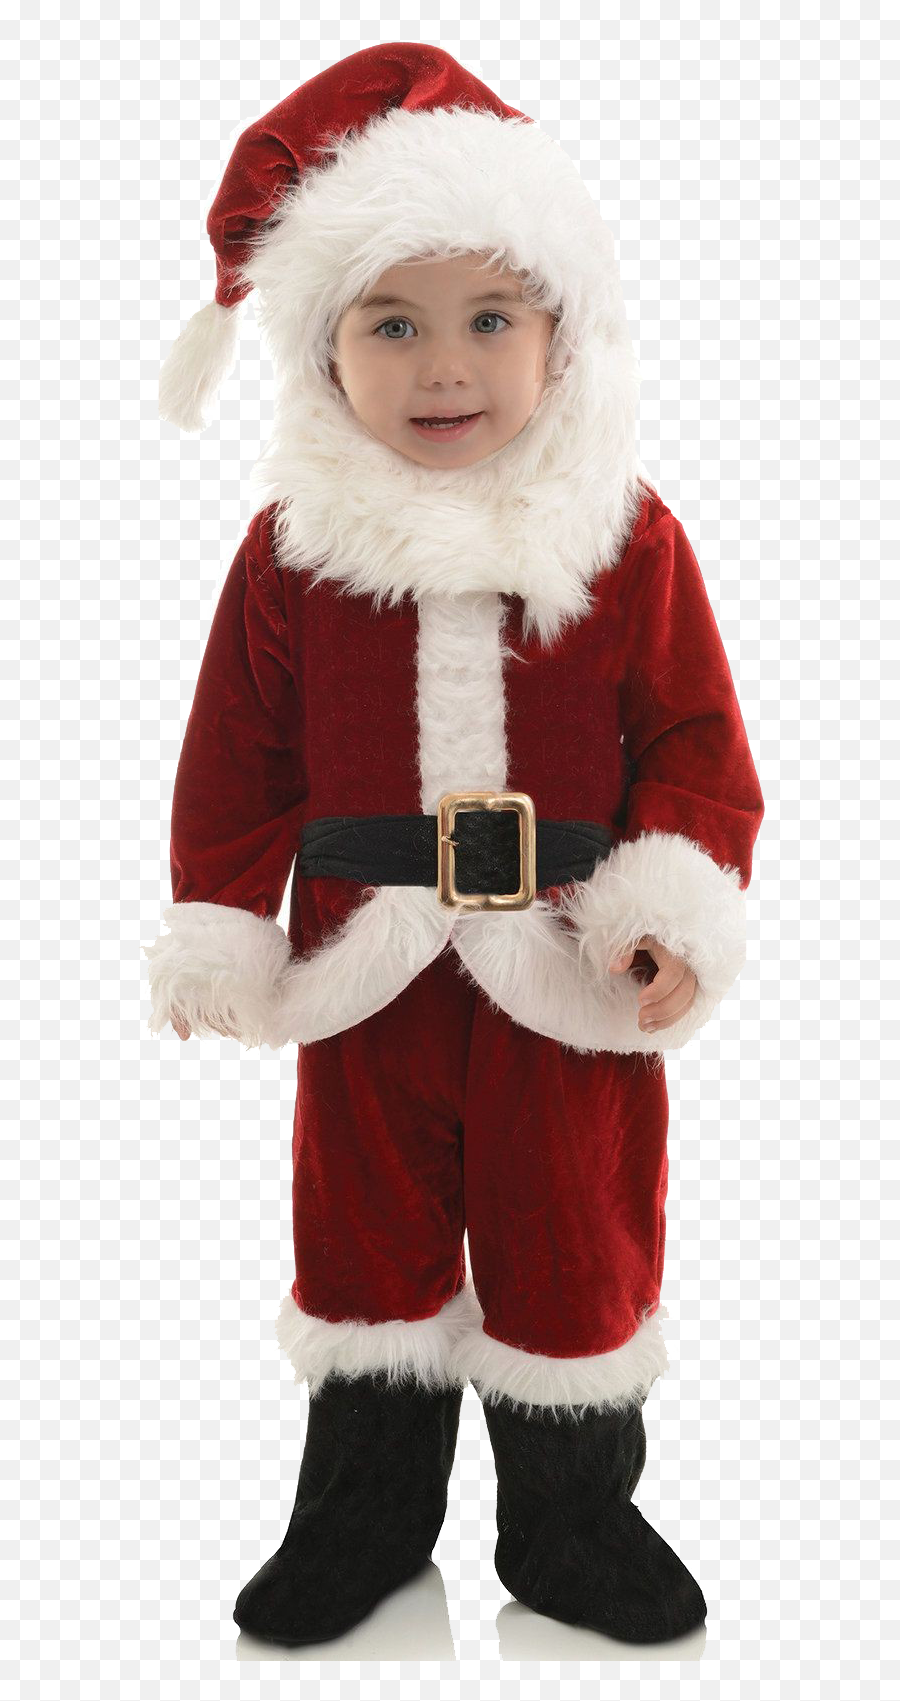 Christmas Baby Png Transparent Background - Santa Claus Costume For Kids,Baby Transparent Background